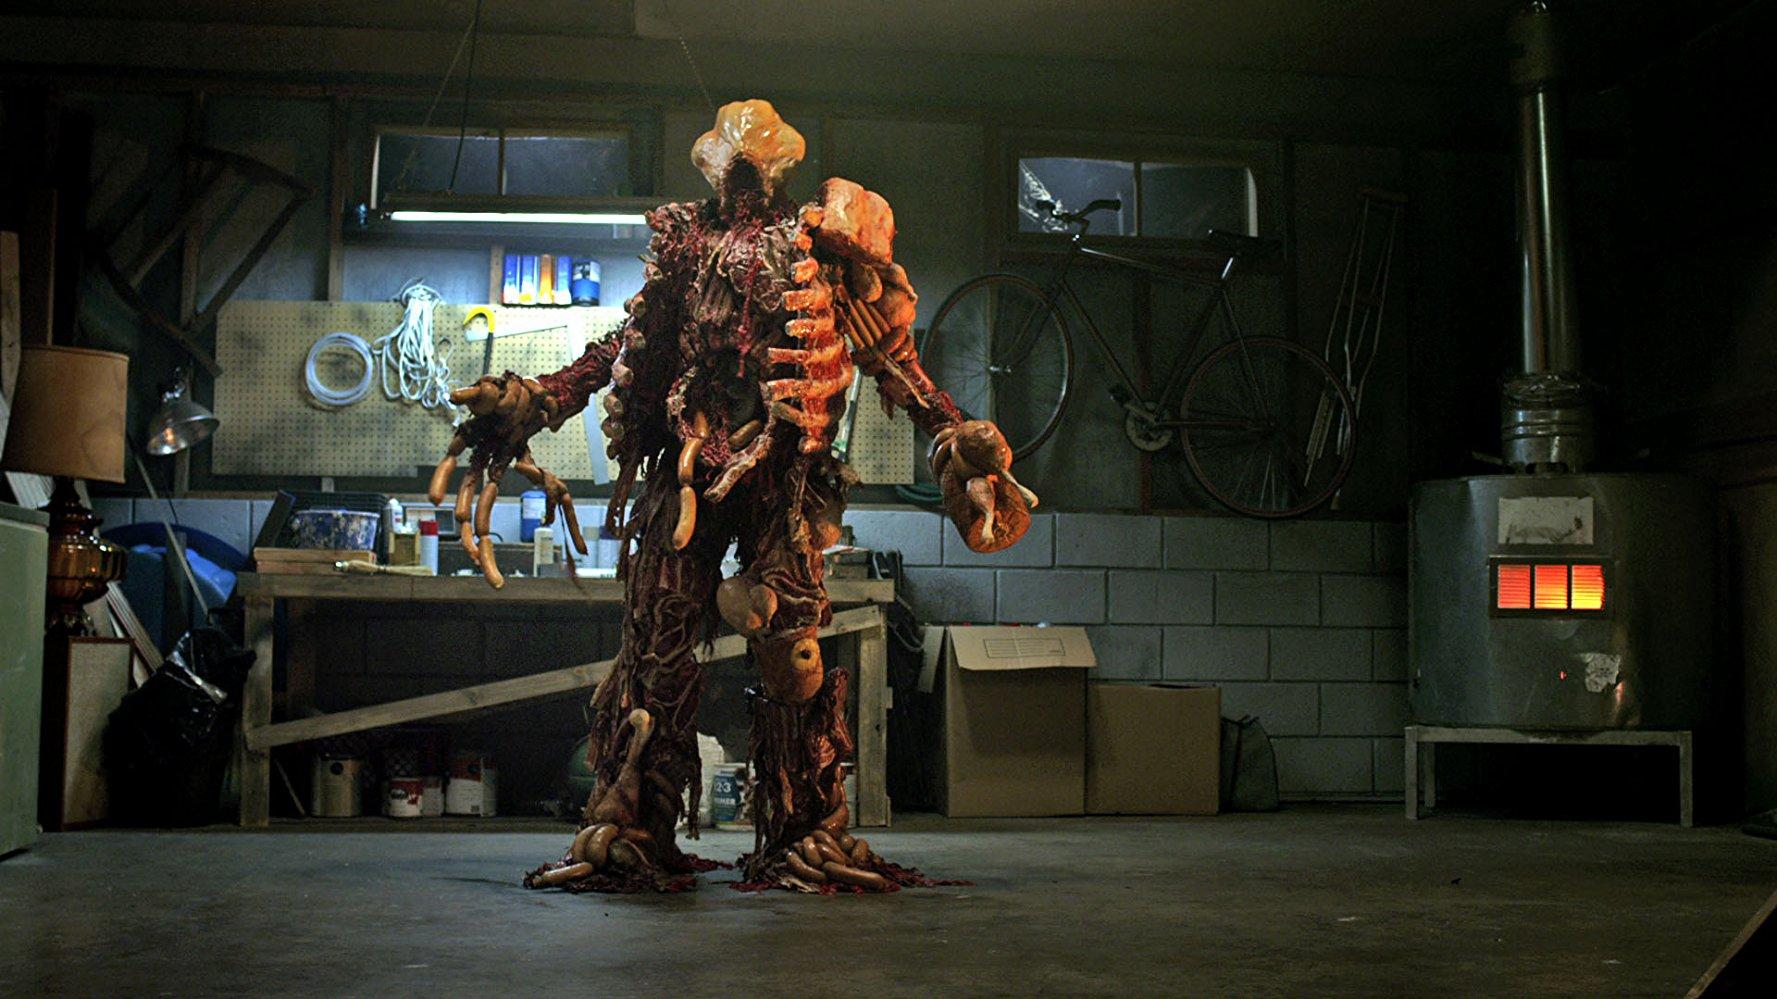 A demon takes bodily form made up of all the meat in a freezer in John Dies at the End (2012)